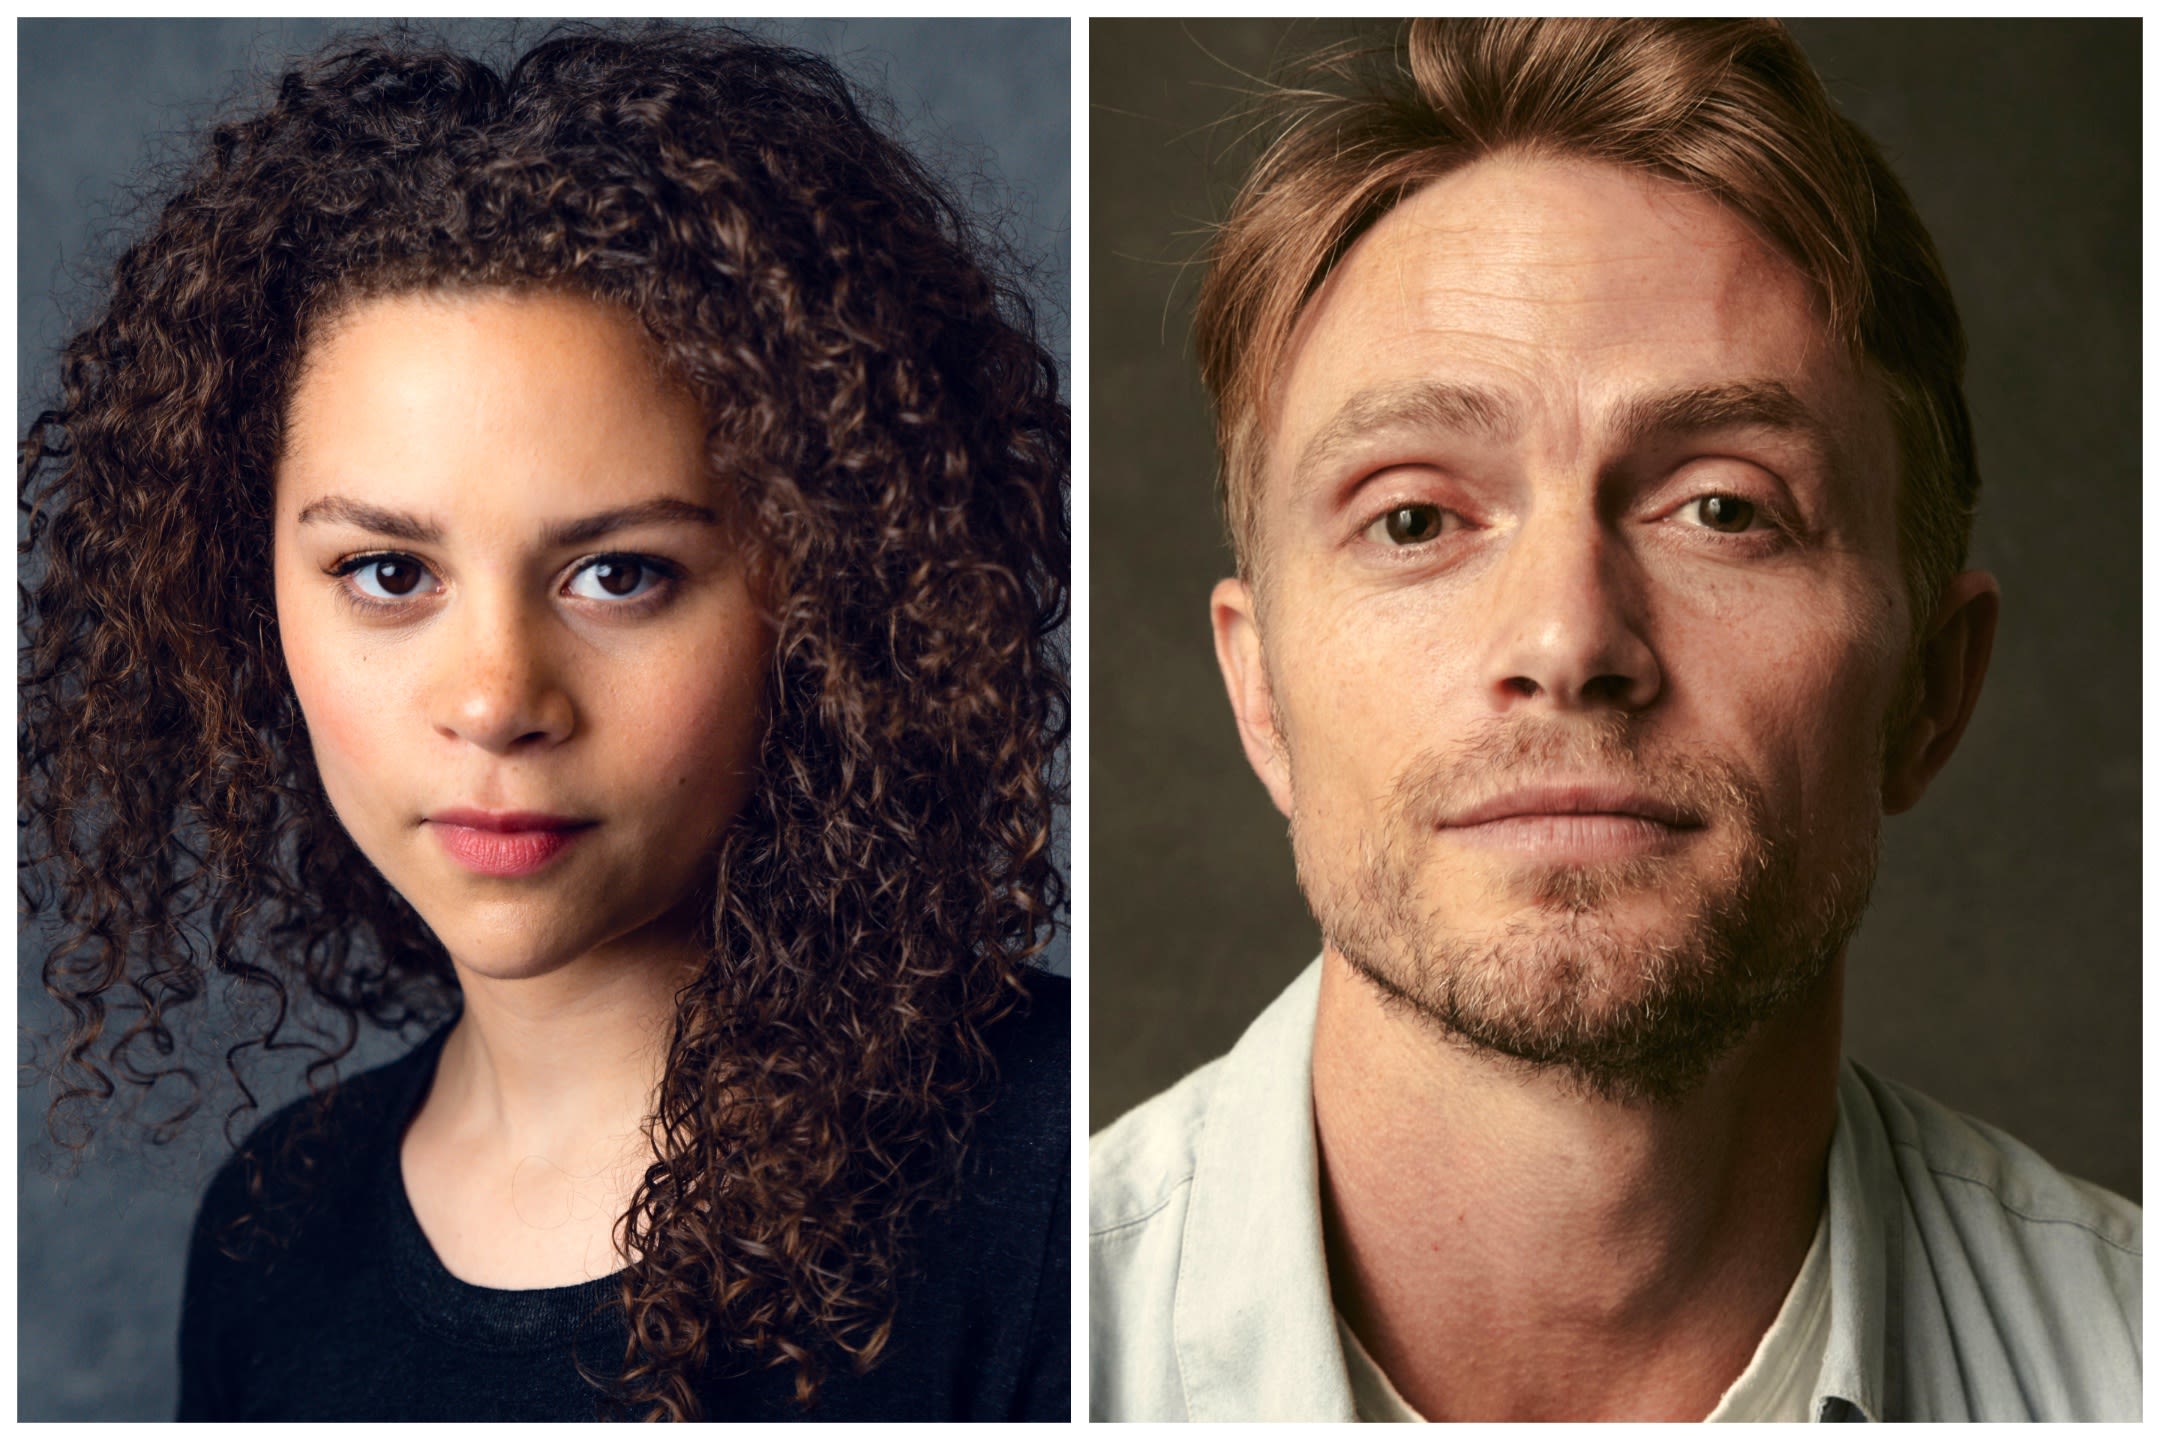 Lily Santiago and Wilson Bethel Join Eric Bana in Yosemite Murder Series ‘Untamed’ at Netflix